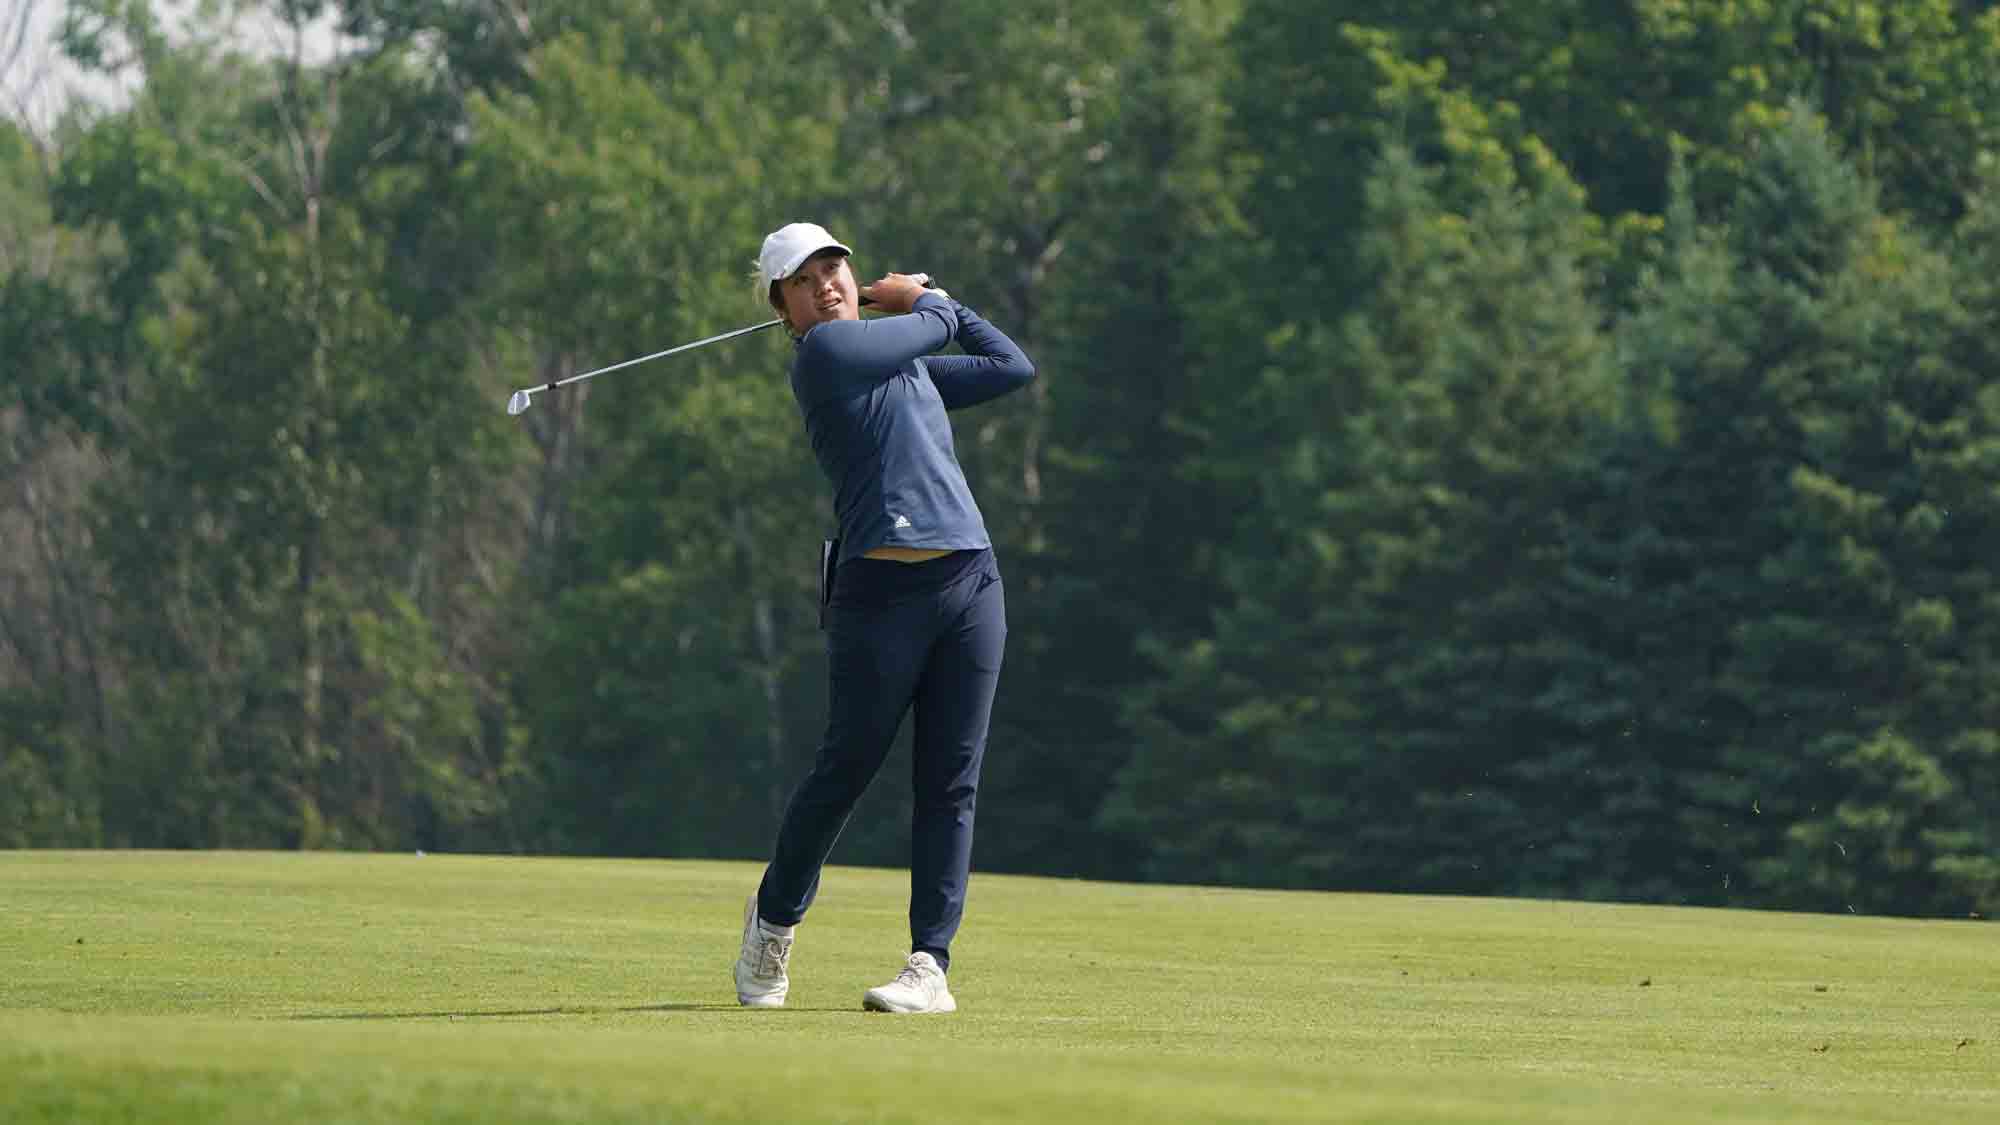 Natasha Andrea Oon during the opening round of the Island Resort Championship